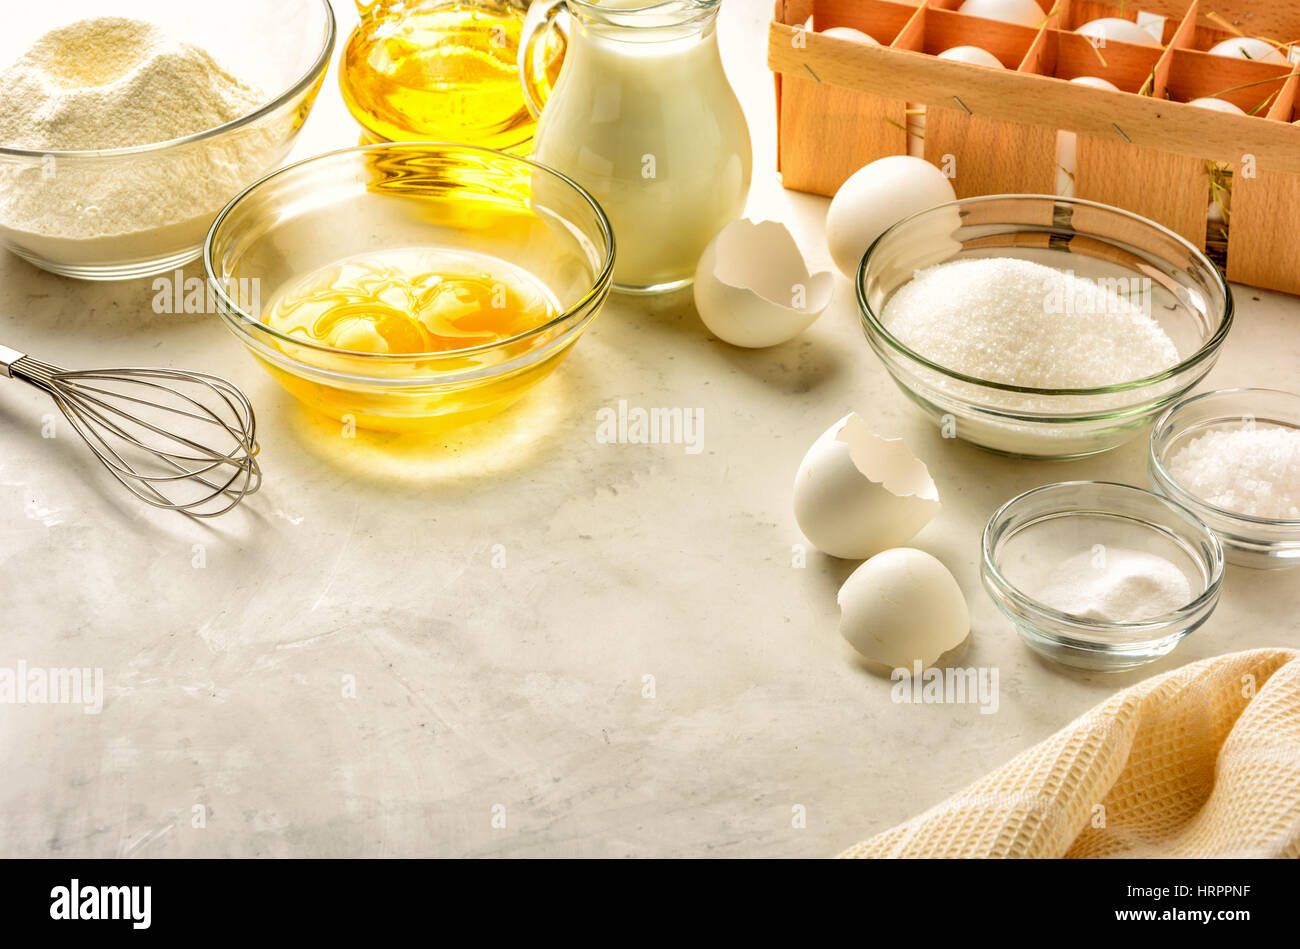 Ingredients for making pancakes on a white background. Copy space. Stock Photo